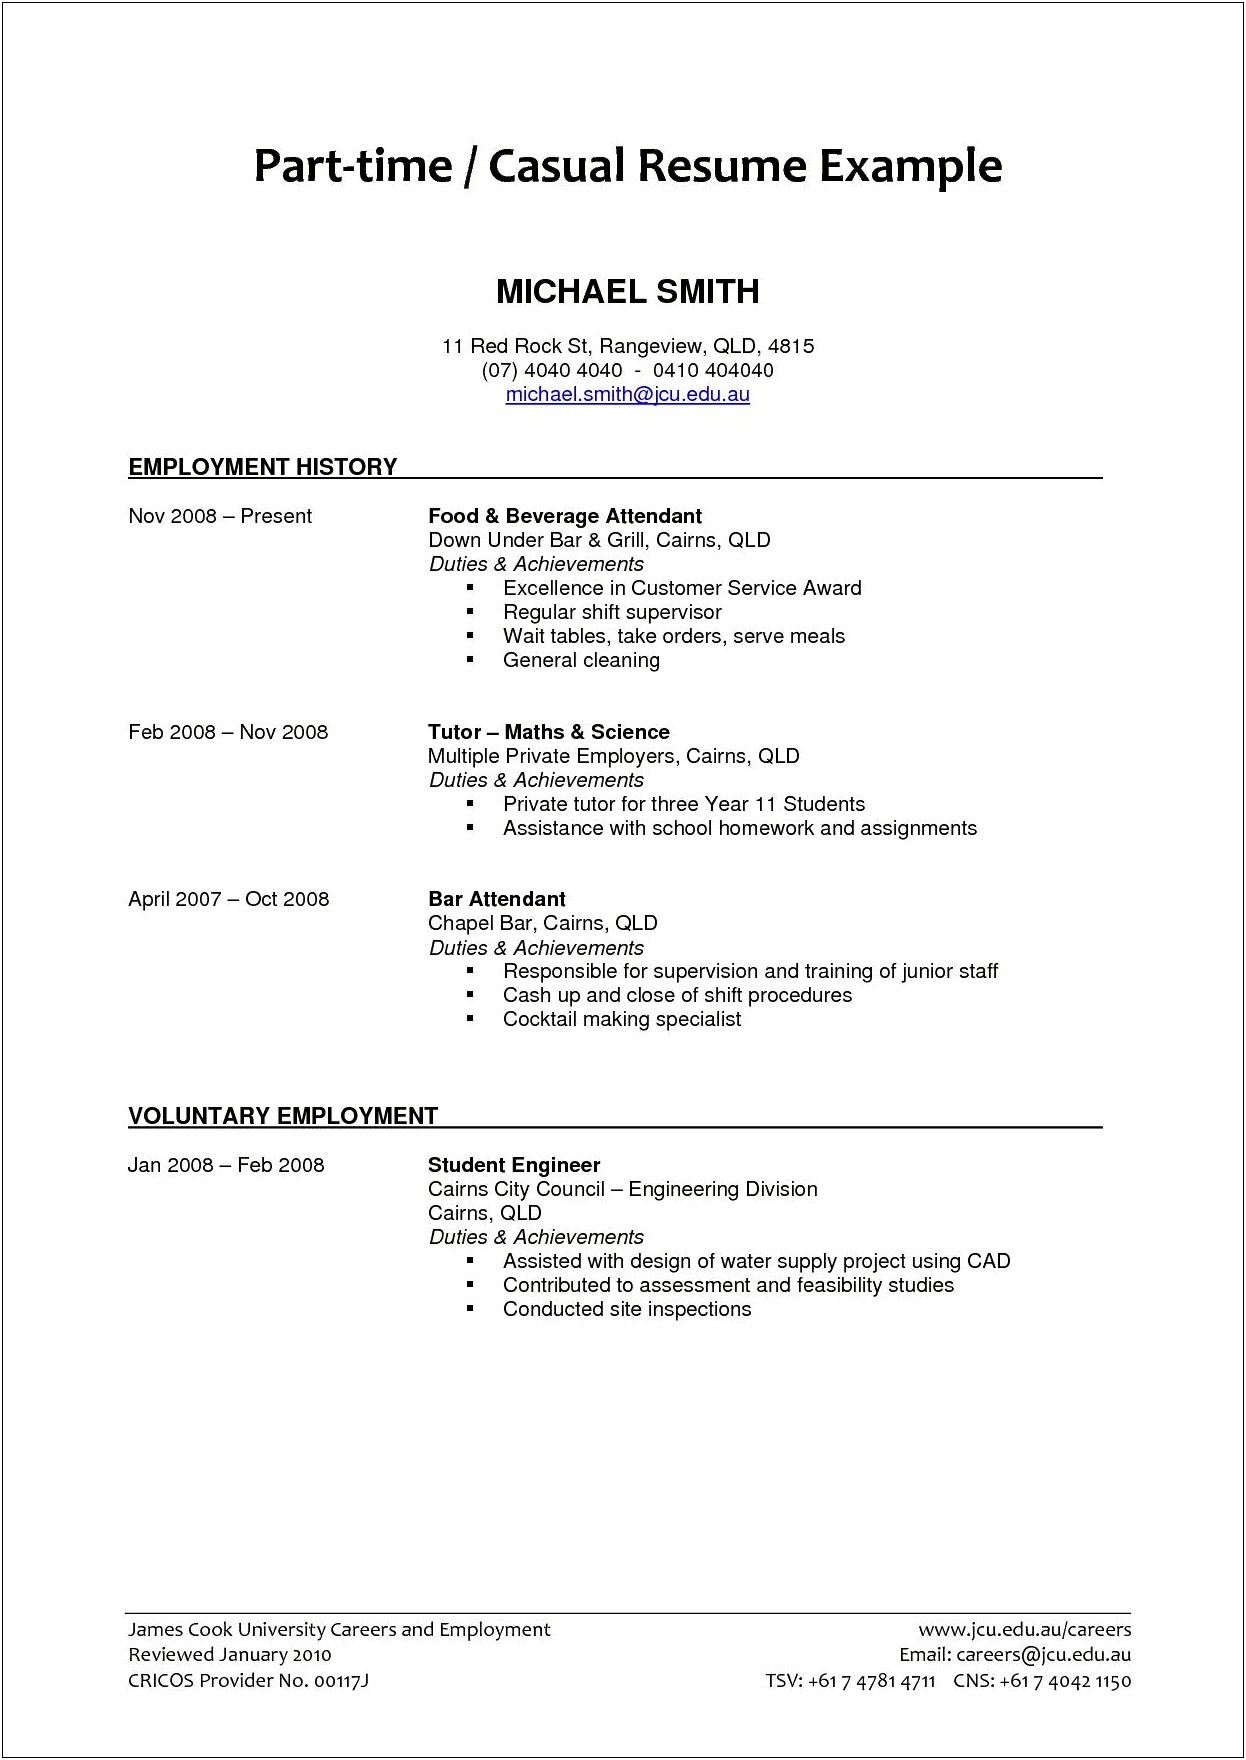 Resume Summary Examples For Part Time